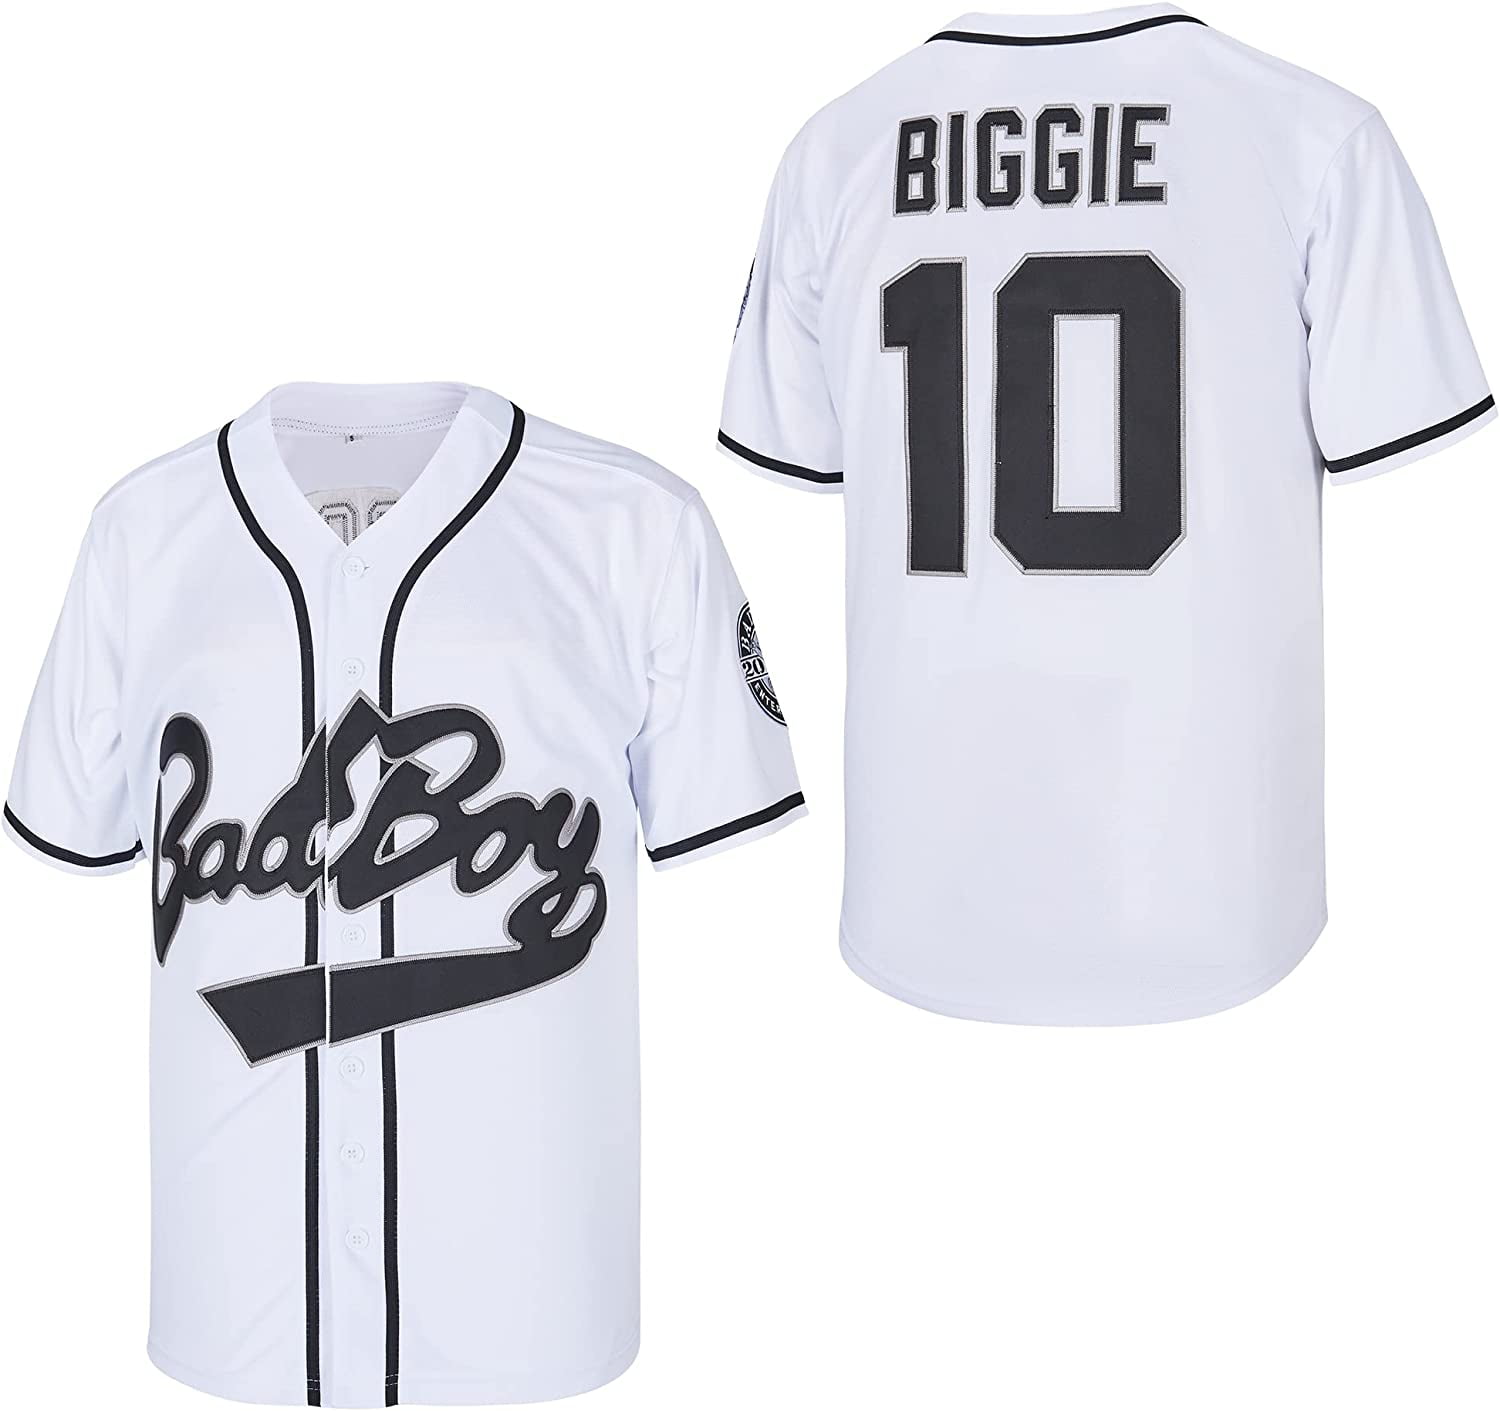 #10 Biggie Bad Boy Movie Baseball Jersey Stitched 90s Hip Hop Unisex Clothing for Party Size S-XXXL